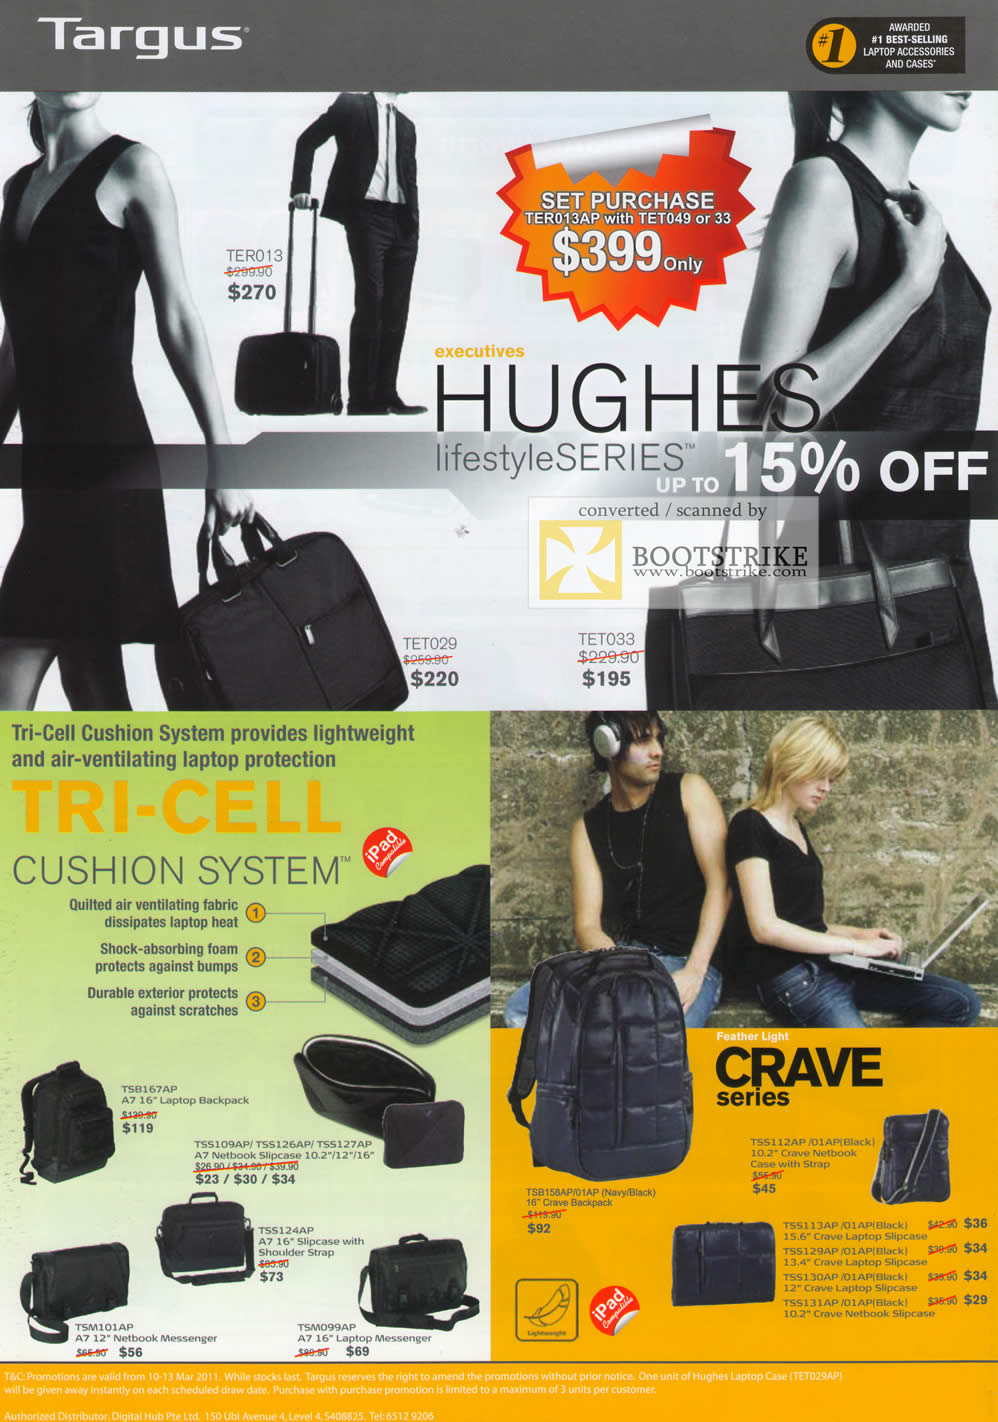 IT Show 2011 price list image brochure of Targus Lifestyle Series Hughes Tri-Cell Cushion System Messenger